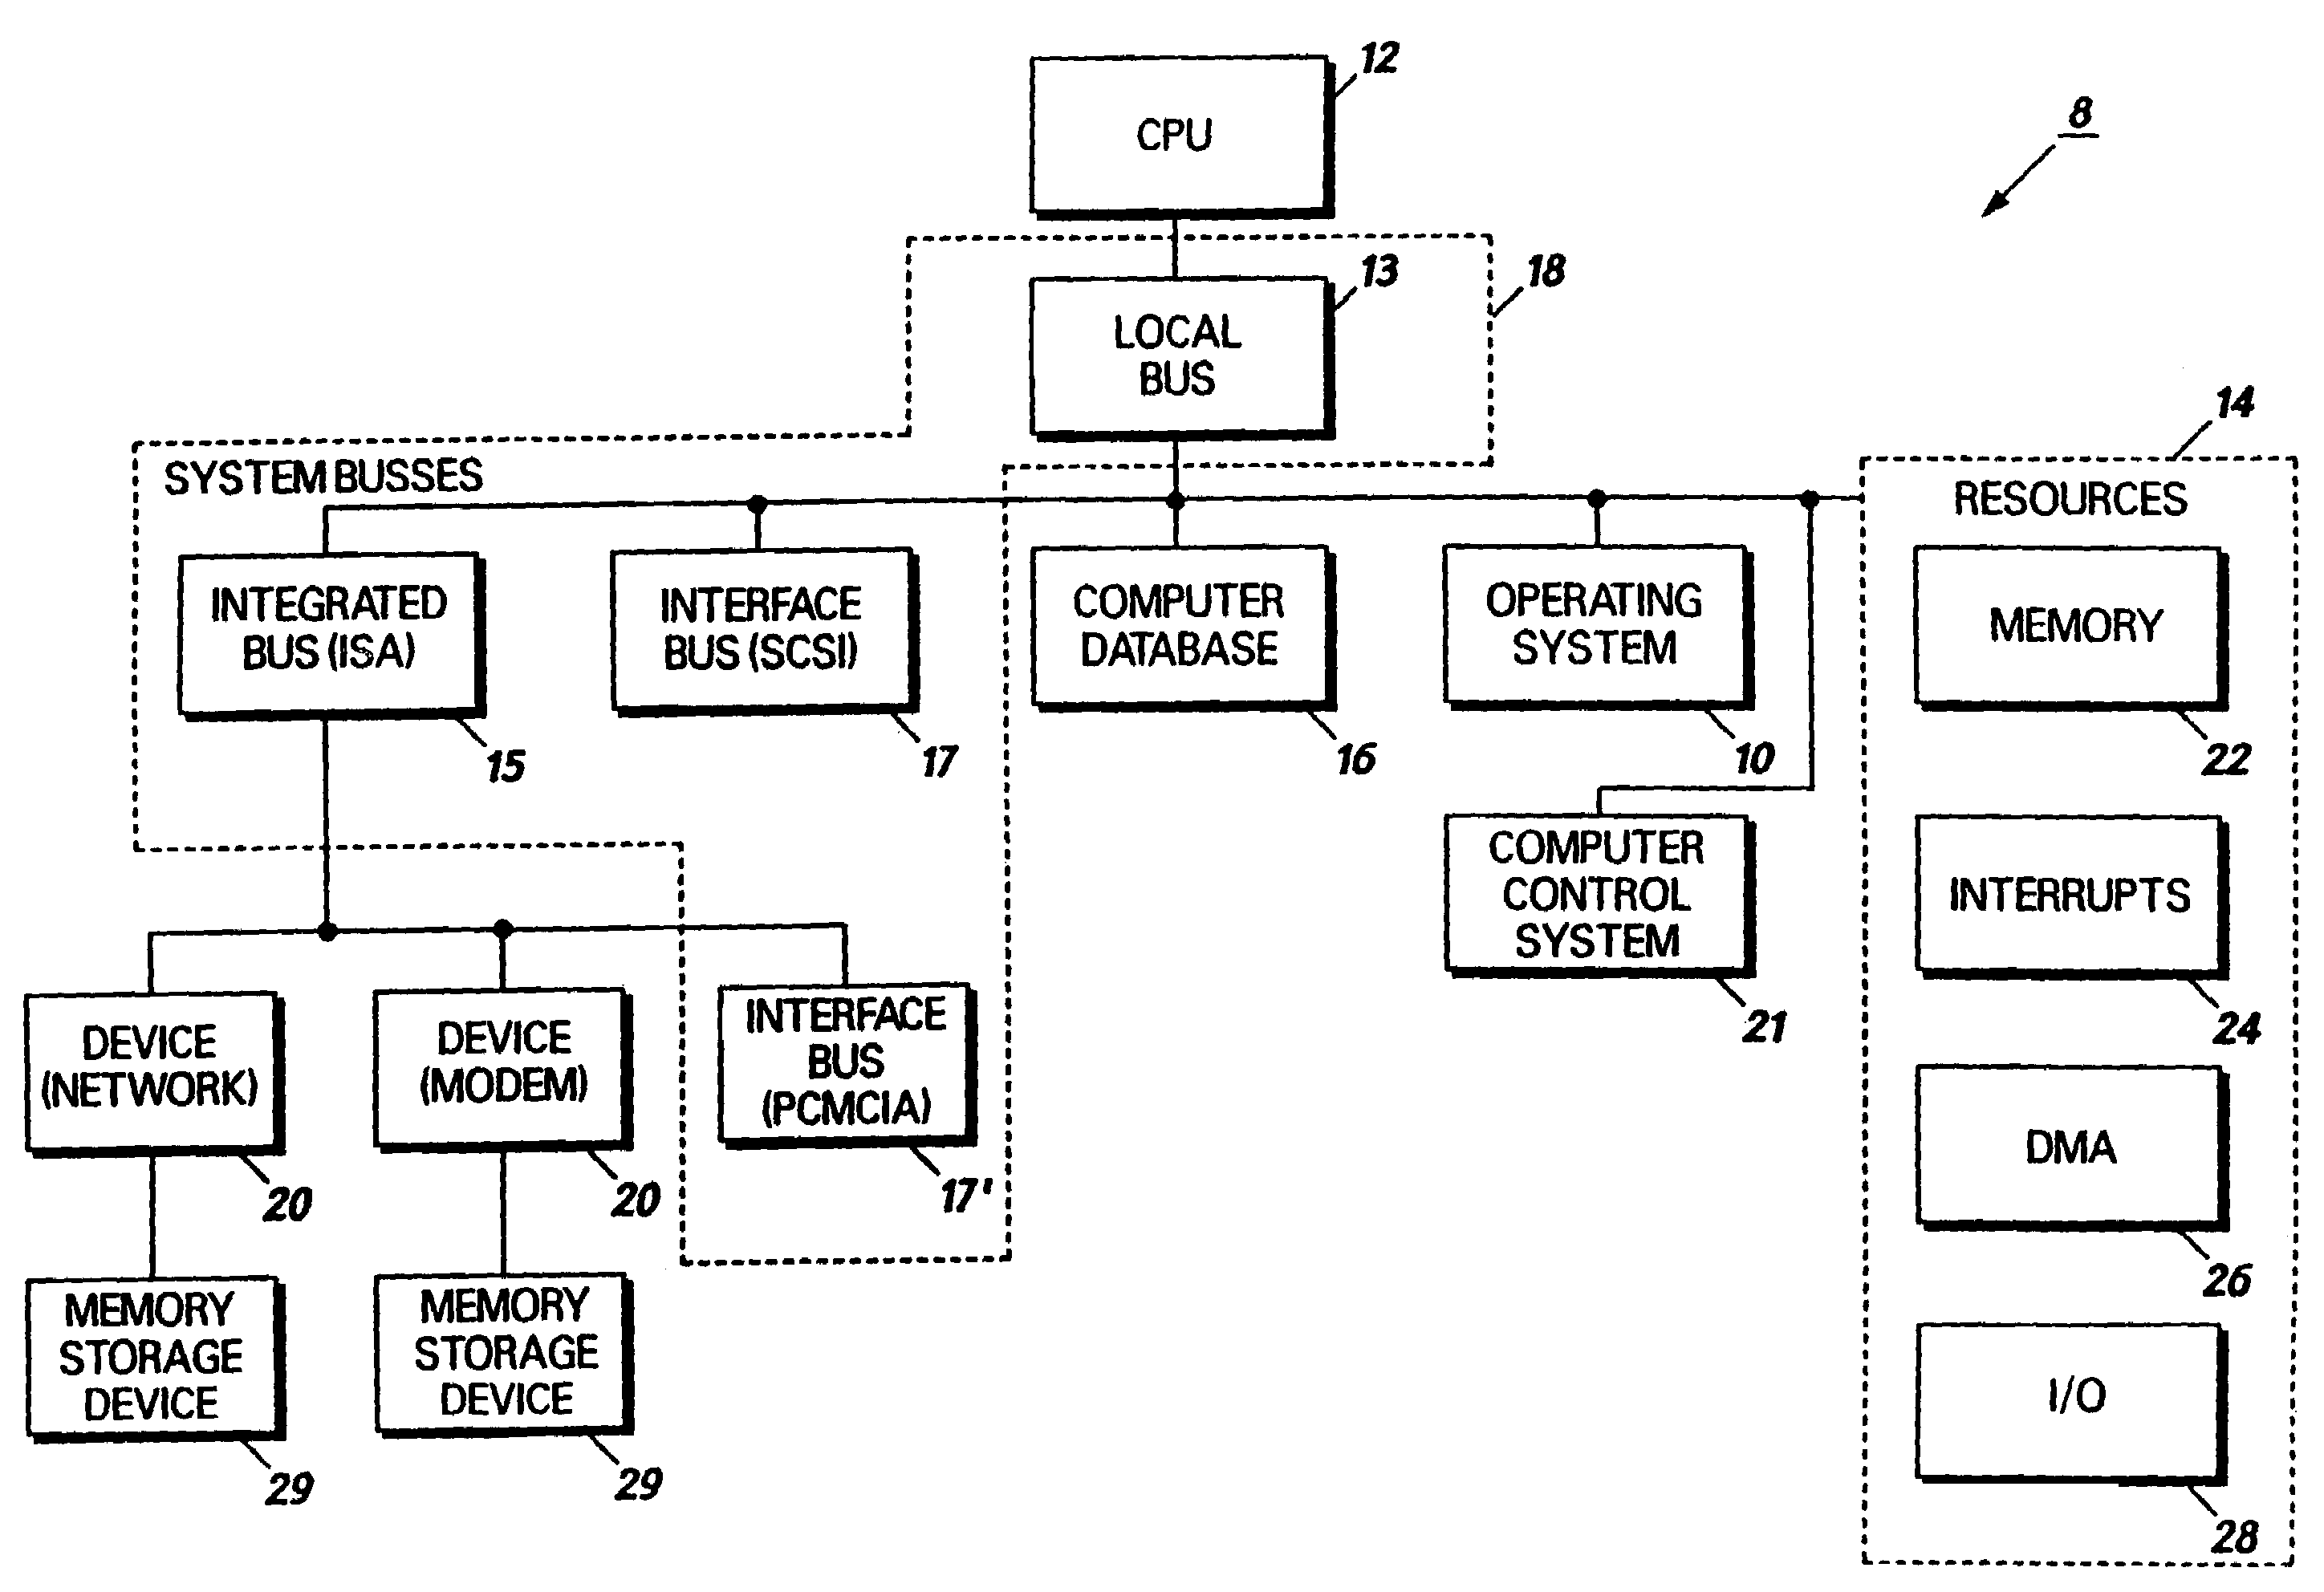 System for allocating resources in a computer system